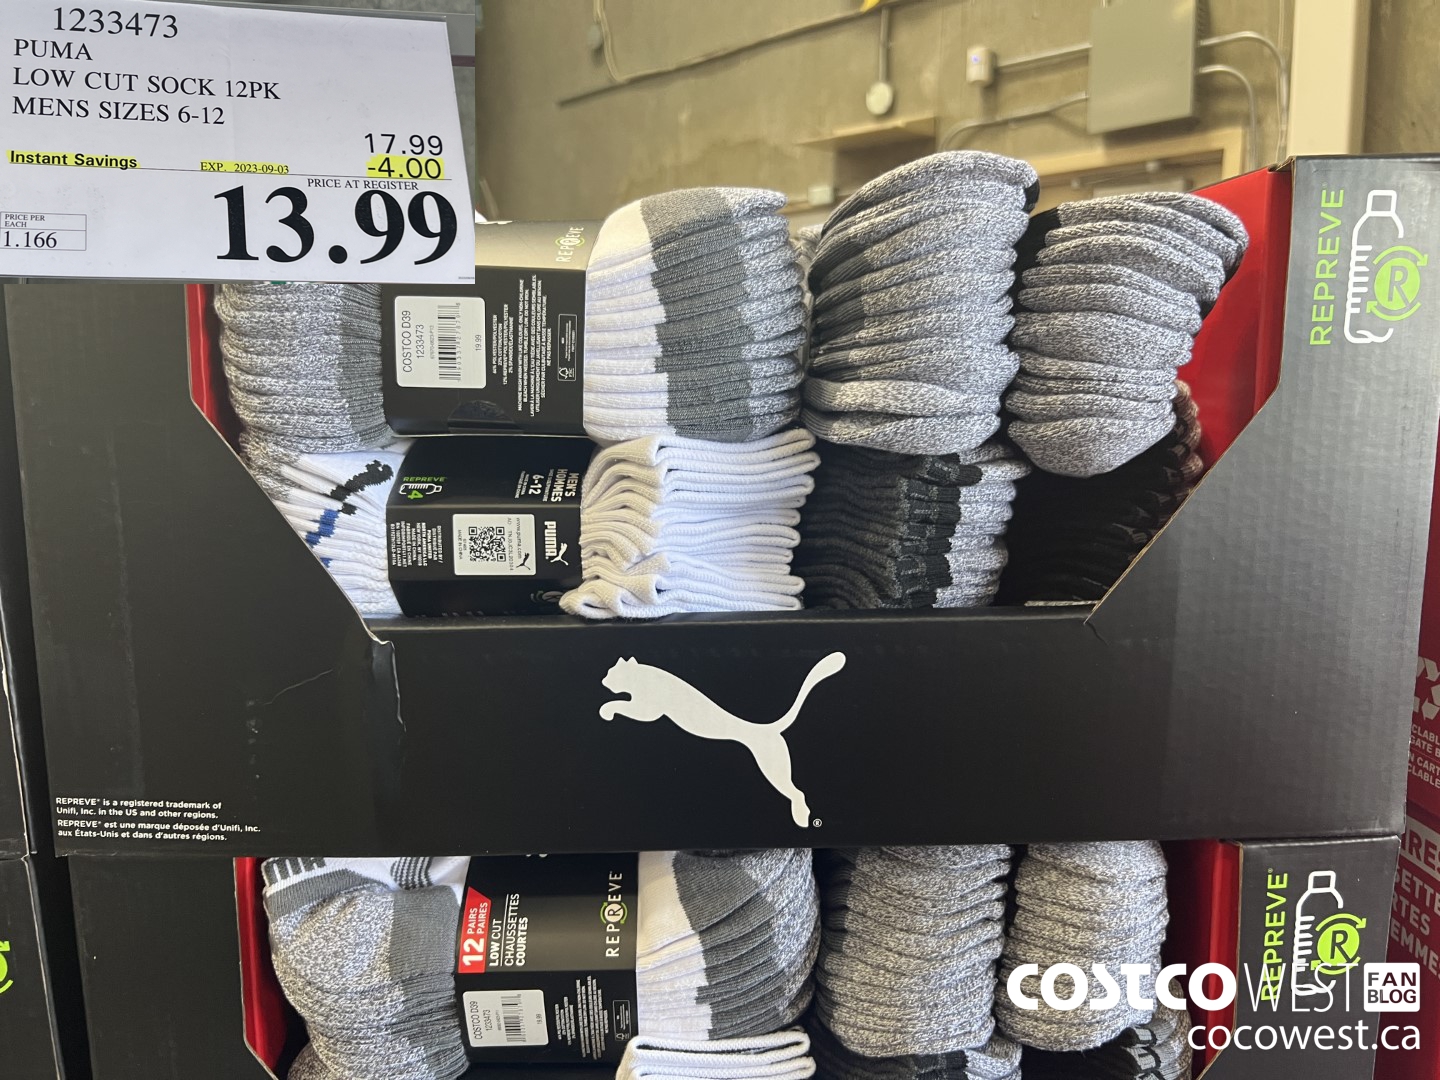 Weekend Update! – Costco Sale Items for Aug 11-13, 2023 for BC, AB, MB, SK  - Costco West Fan Blog